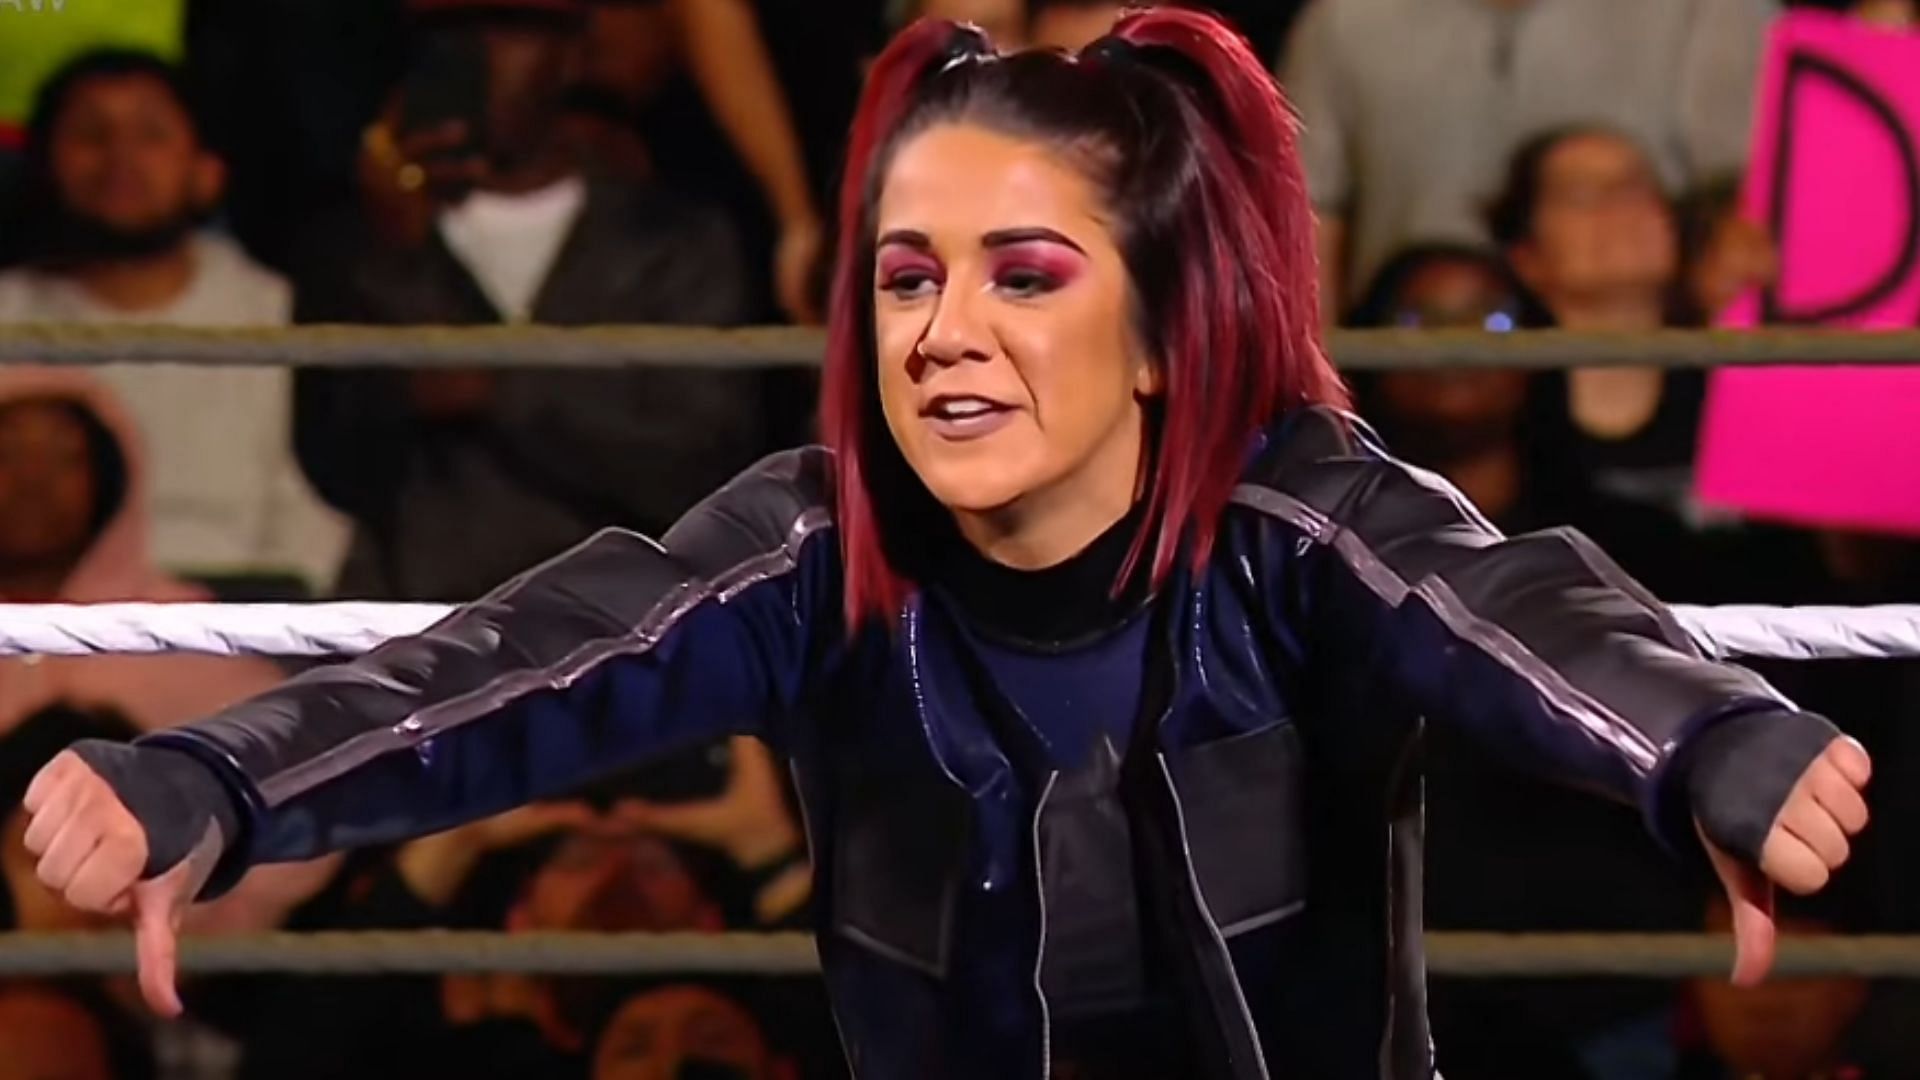 "She just never came back" Bayley is willing to face retired WWE